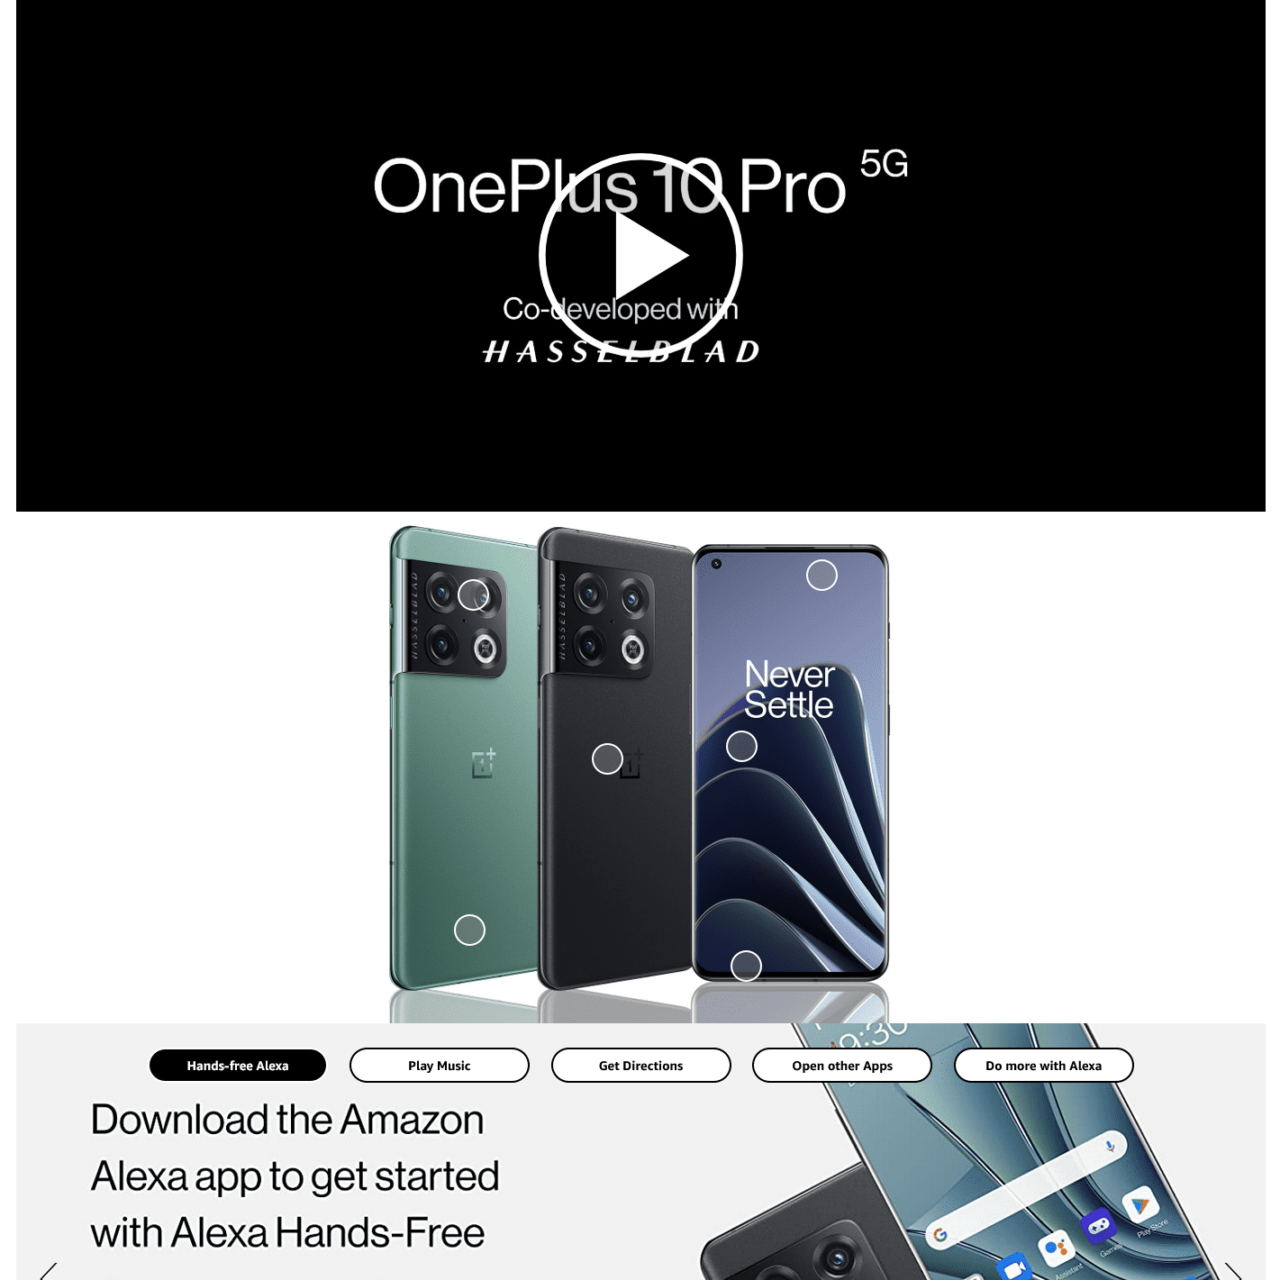 Screenshot 2022 06 09 at 07 43 59 Amazon.com OnePlus 10 Pro 5G Android Smartphone 8GB 128GB U.S. Unlocked Triple Camera co Developed with Hasselblad Volcanic Black Everything Else Cropped Sq Gorilla ROI